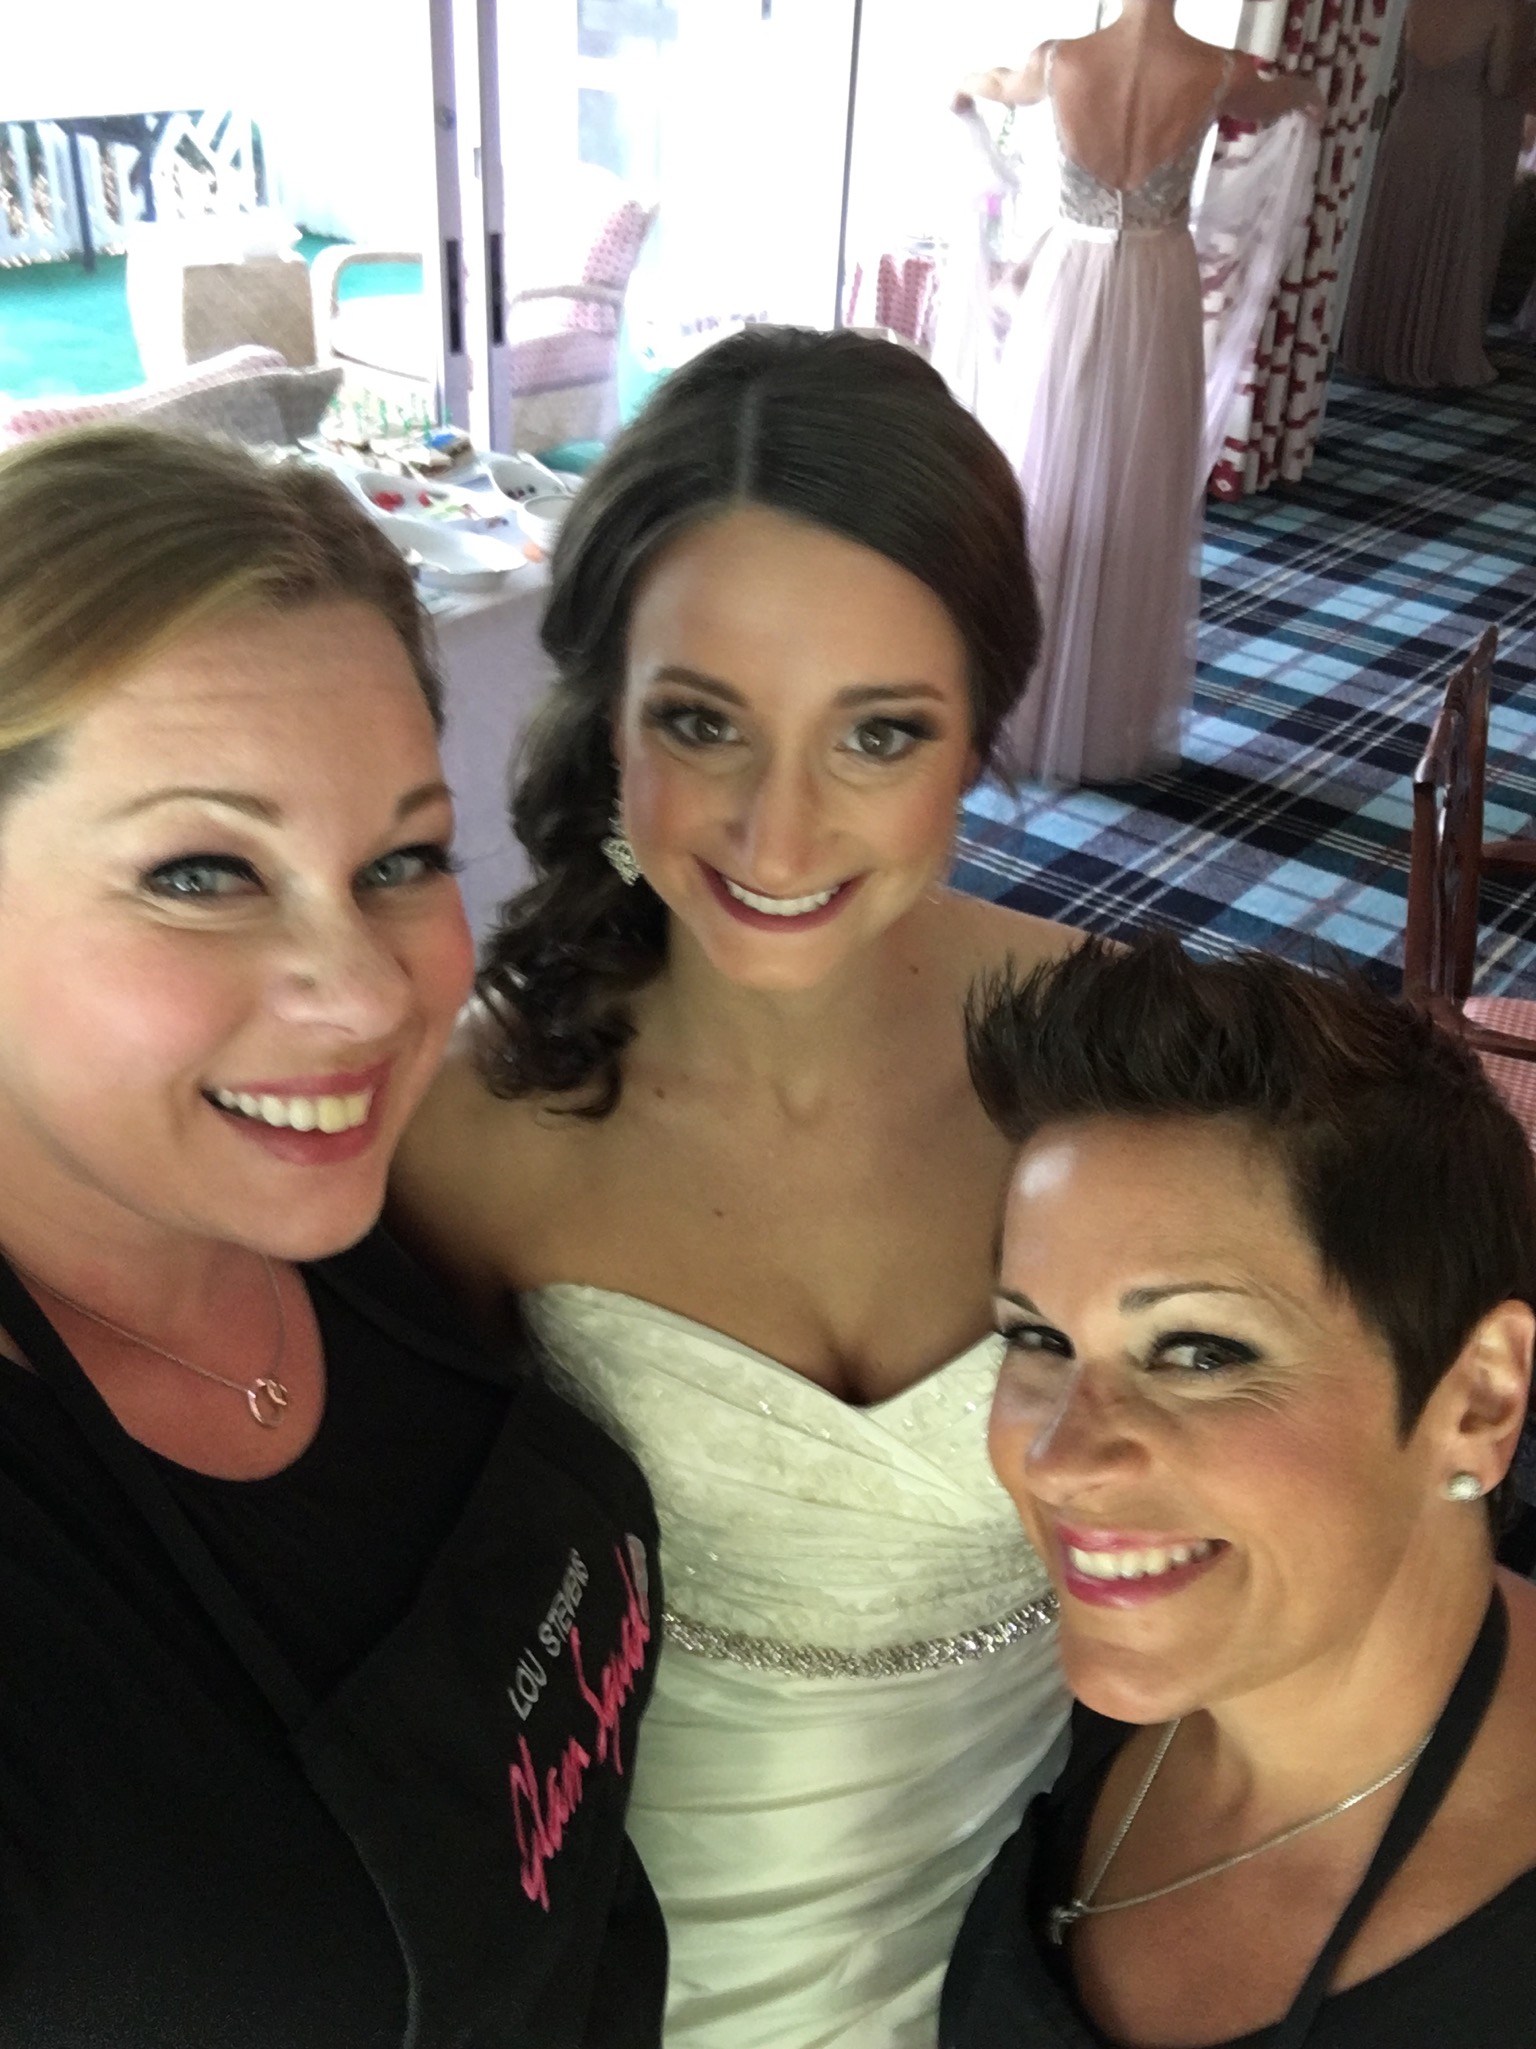 Selfie with our darling bride, a little blurry but we still love it!